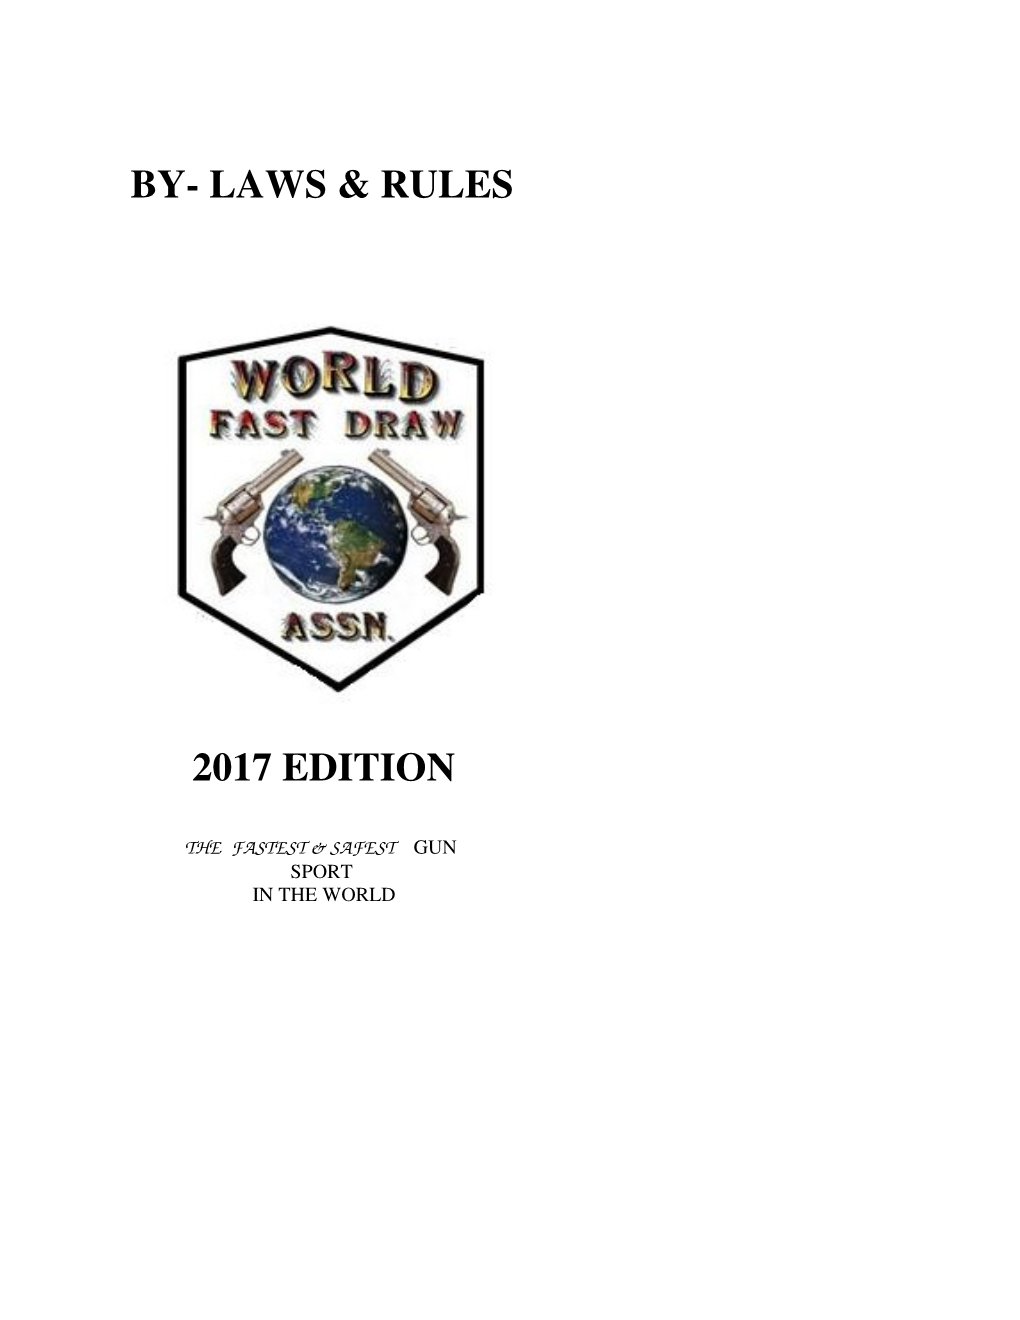 By- Laws & Rules 2017 Edition